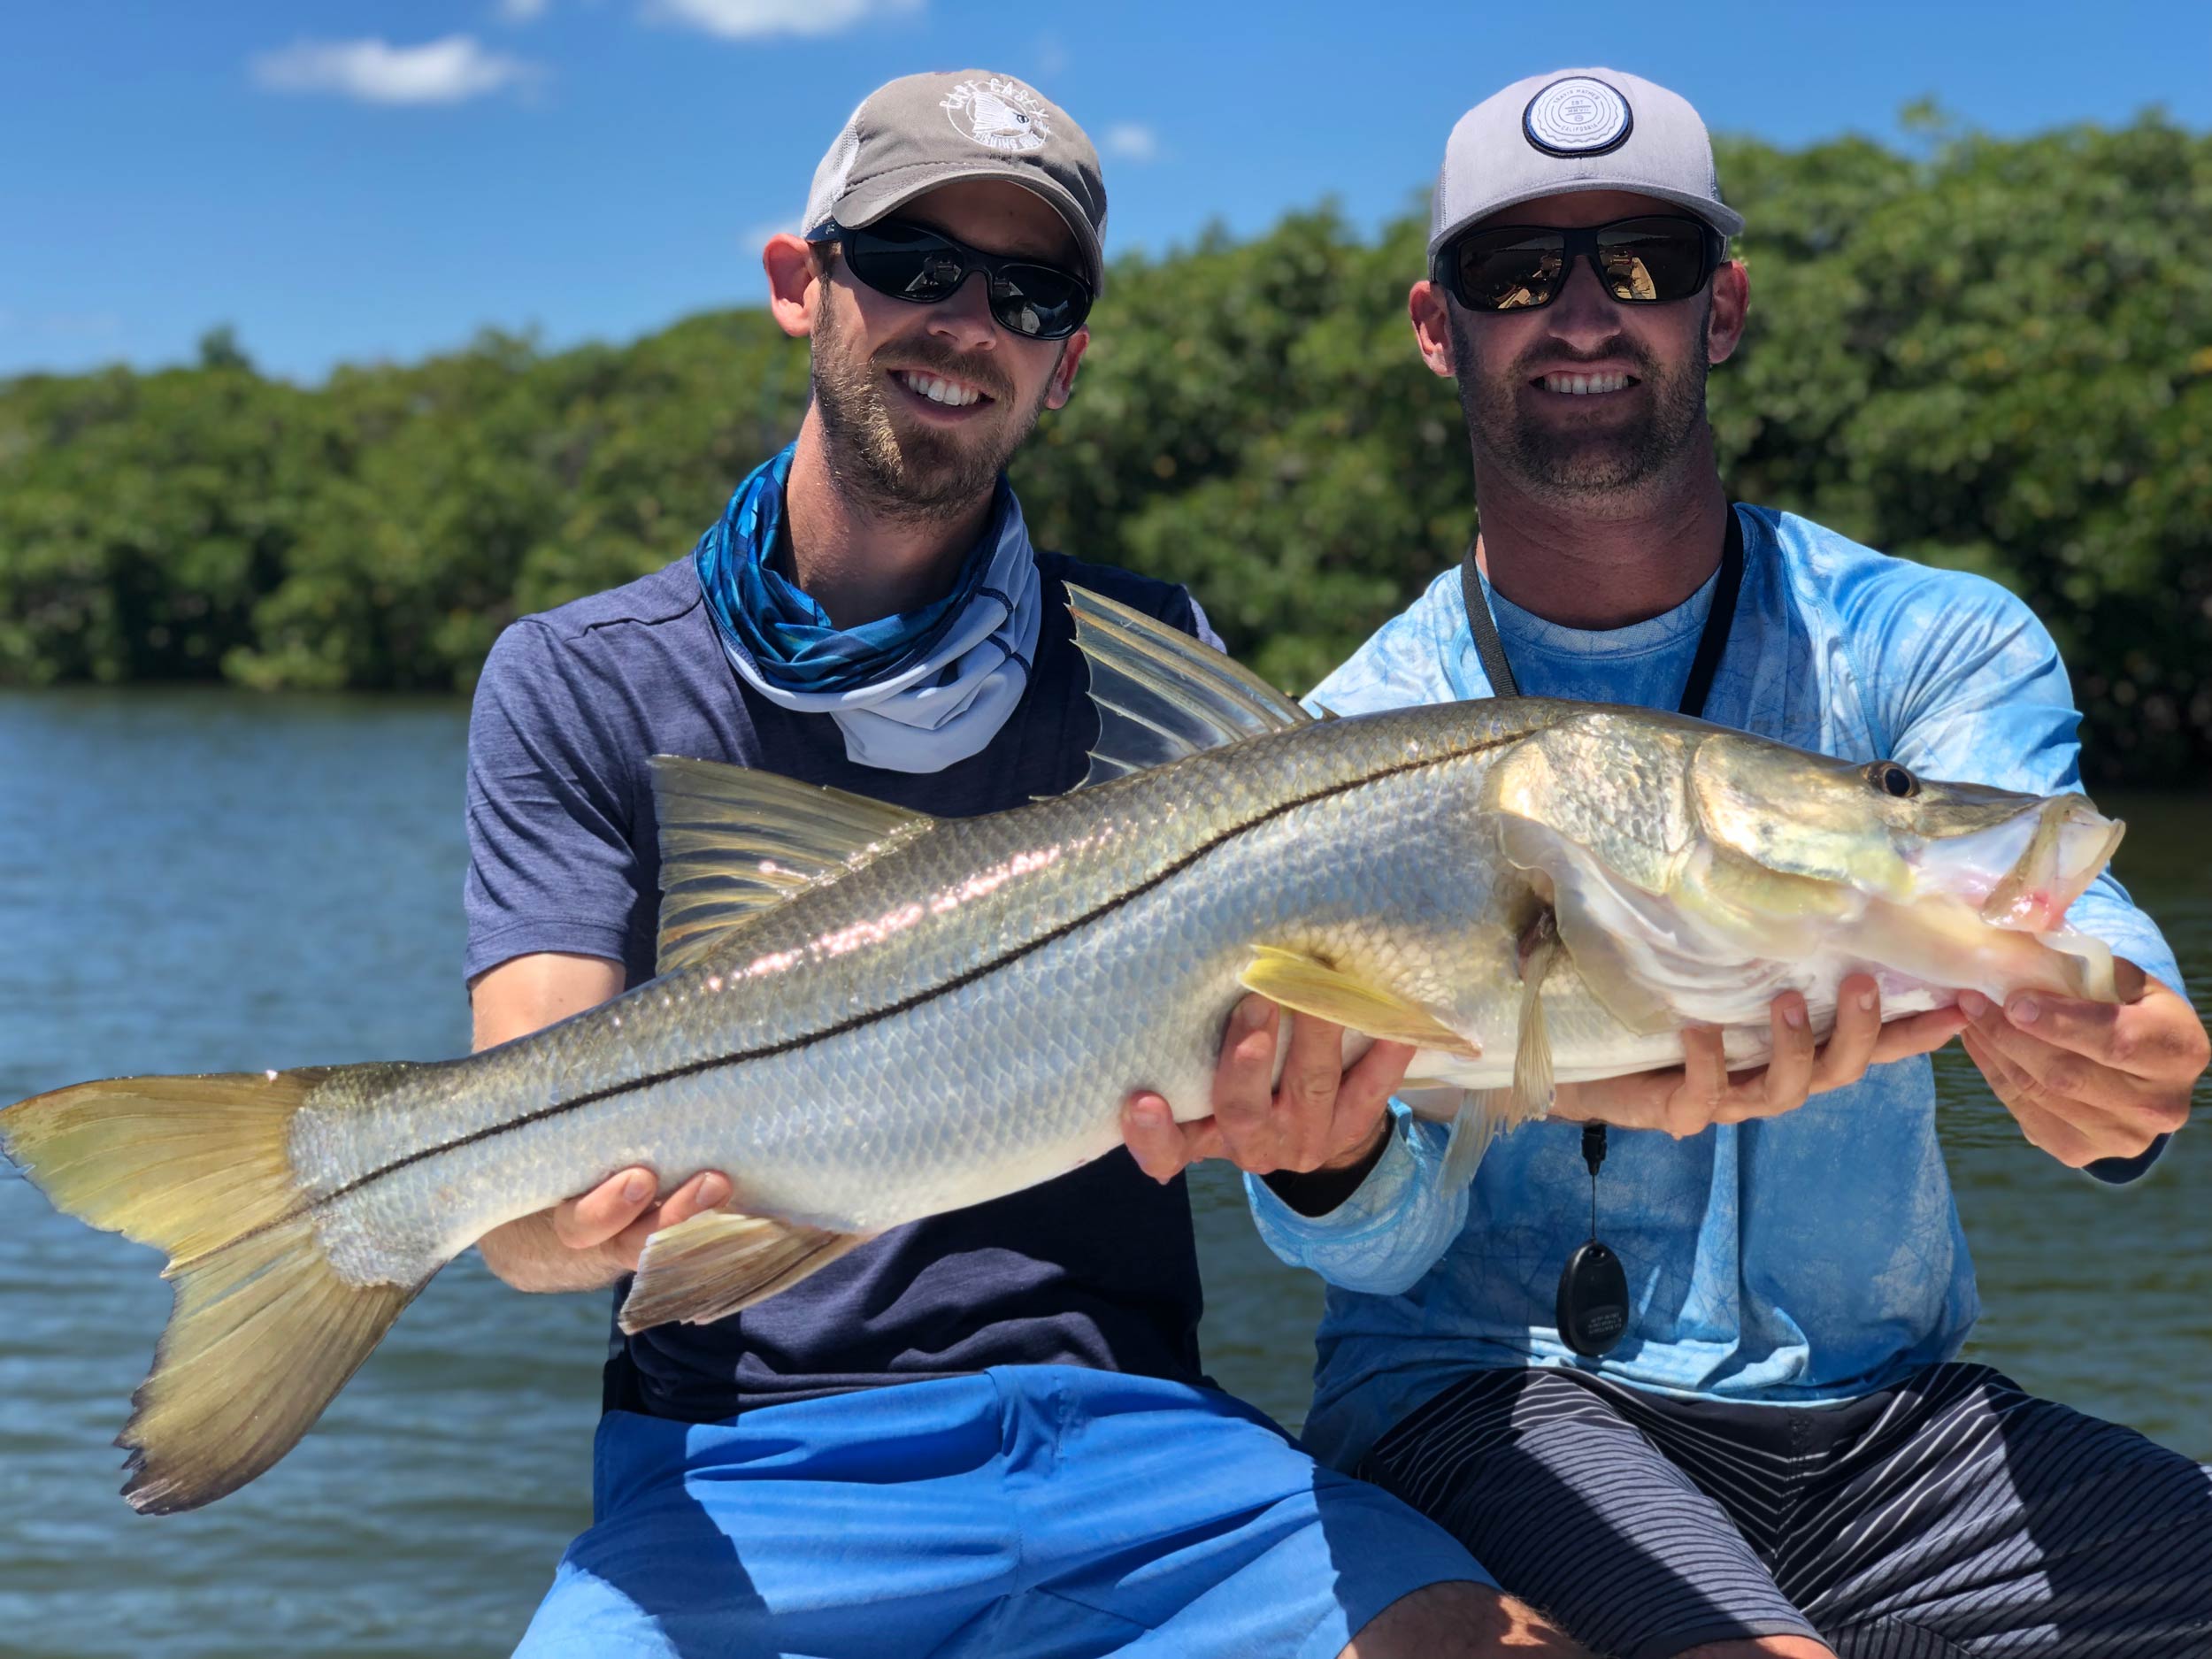 Two smiling anglers sitting on a boat with a large Snook in their hands with trees in the background